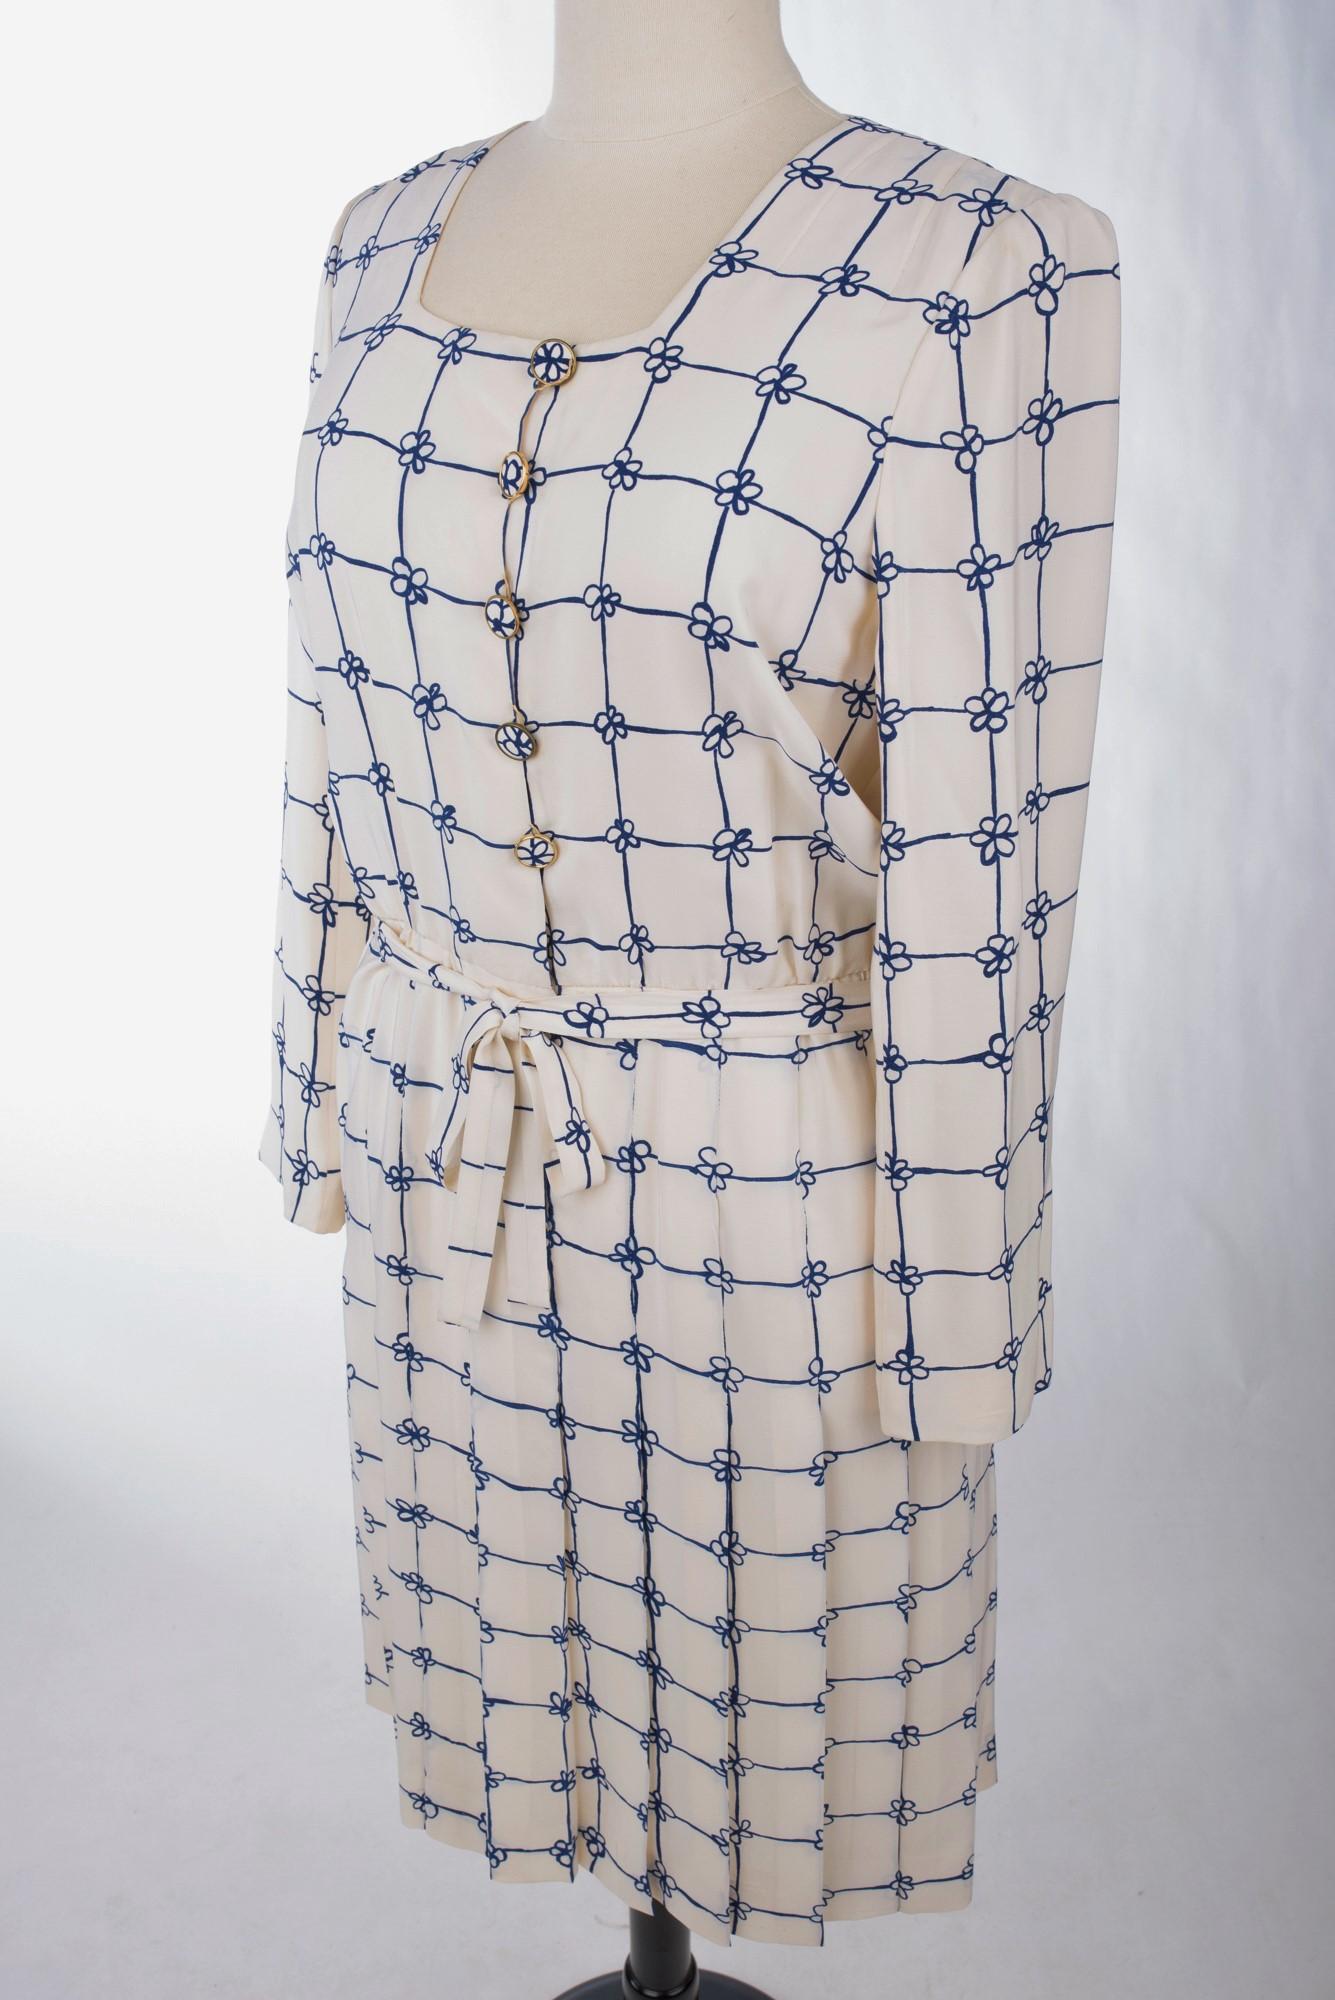 A Mademoiselle Chanel Haute Couture Printed Crepe dress Number 61476 Circa 1960 9